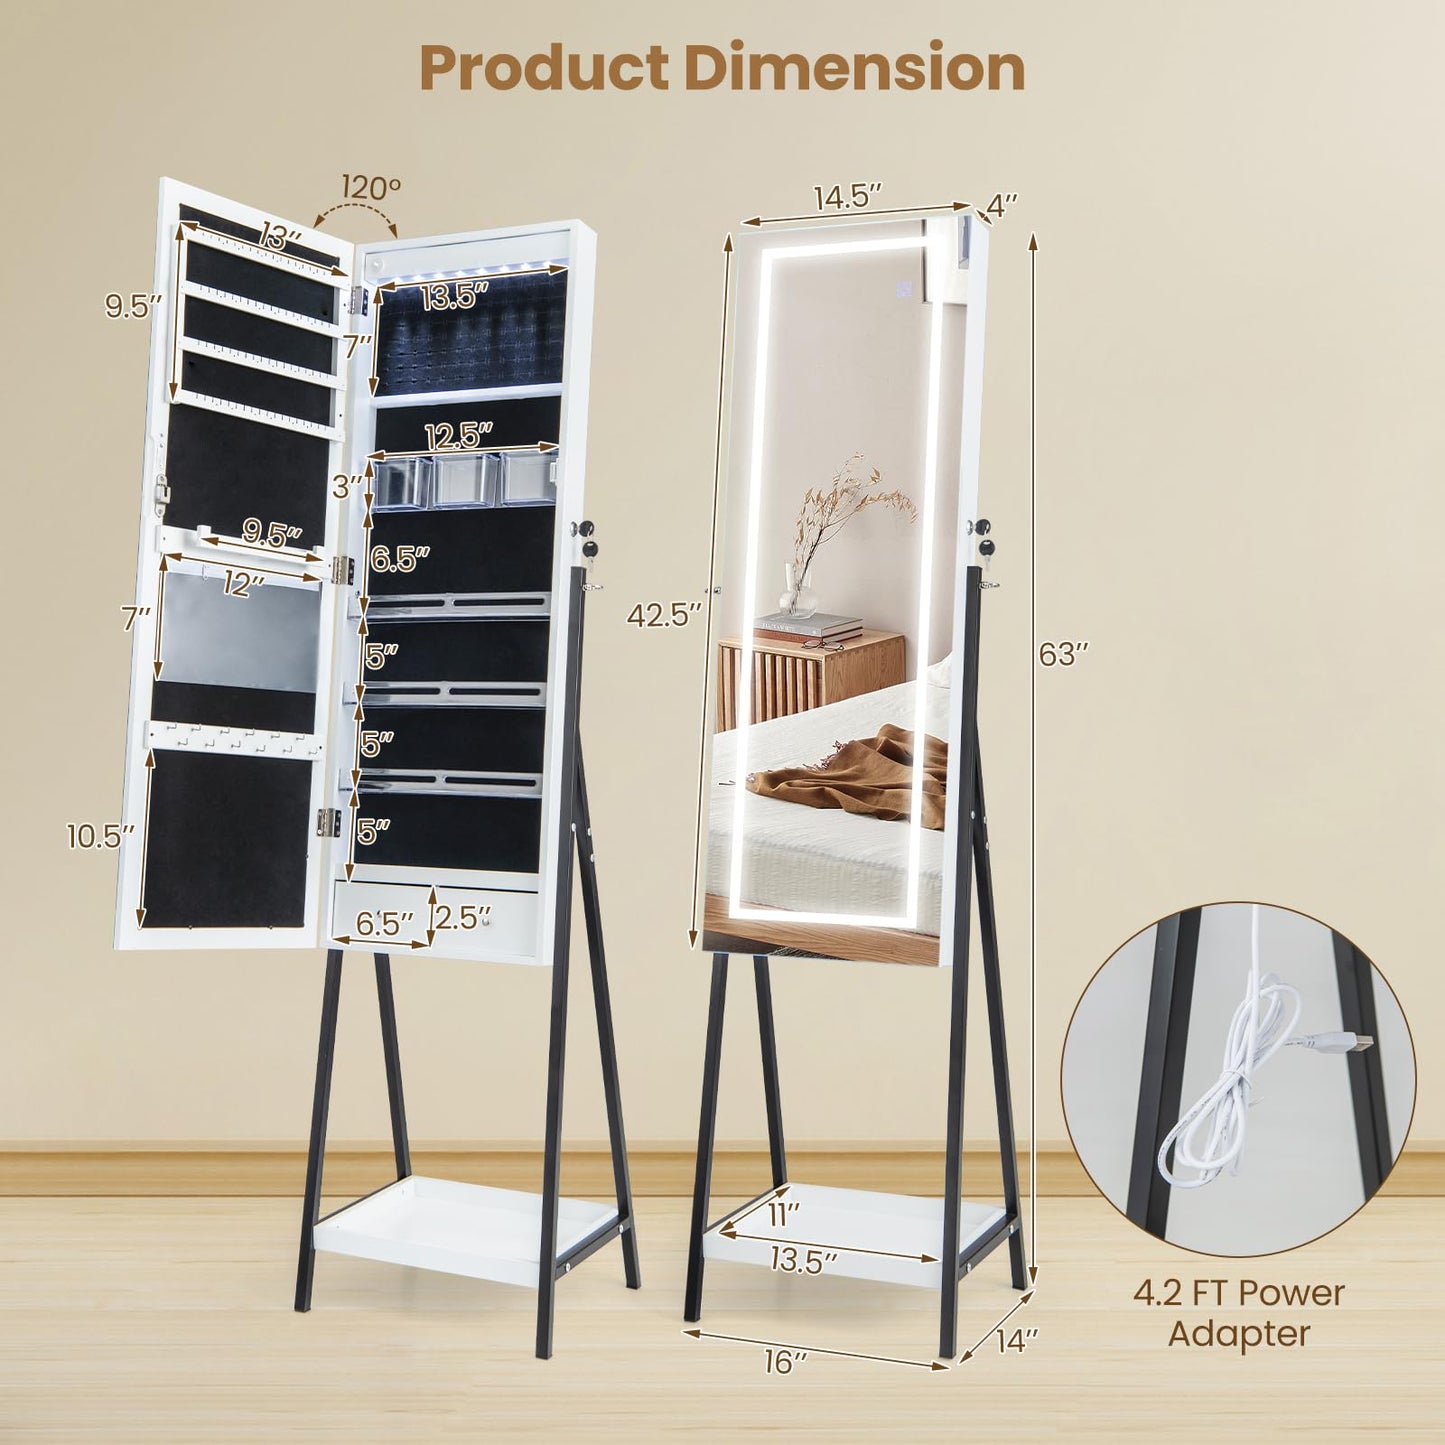 CHARMAID Jewelry Cabinet with LED Mirror, Lockable Standing Jewelry Armoire Organizer with Lighted Full Length Mirror, Adjustable Brightness, Storage